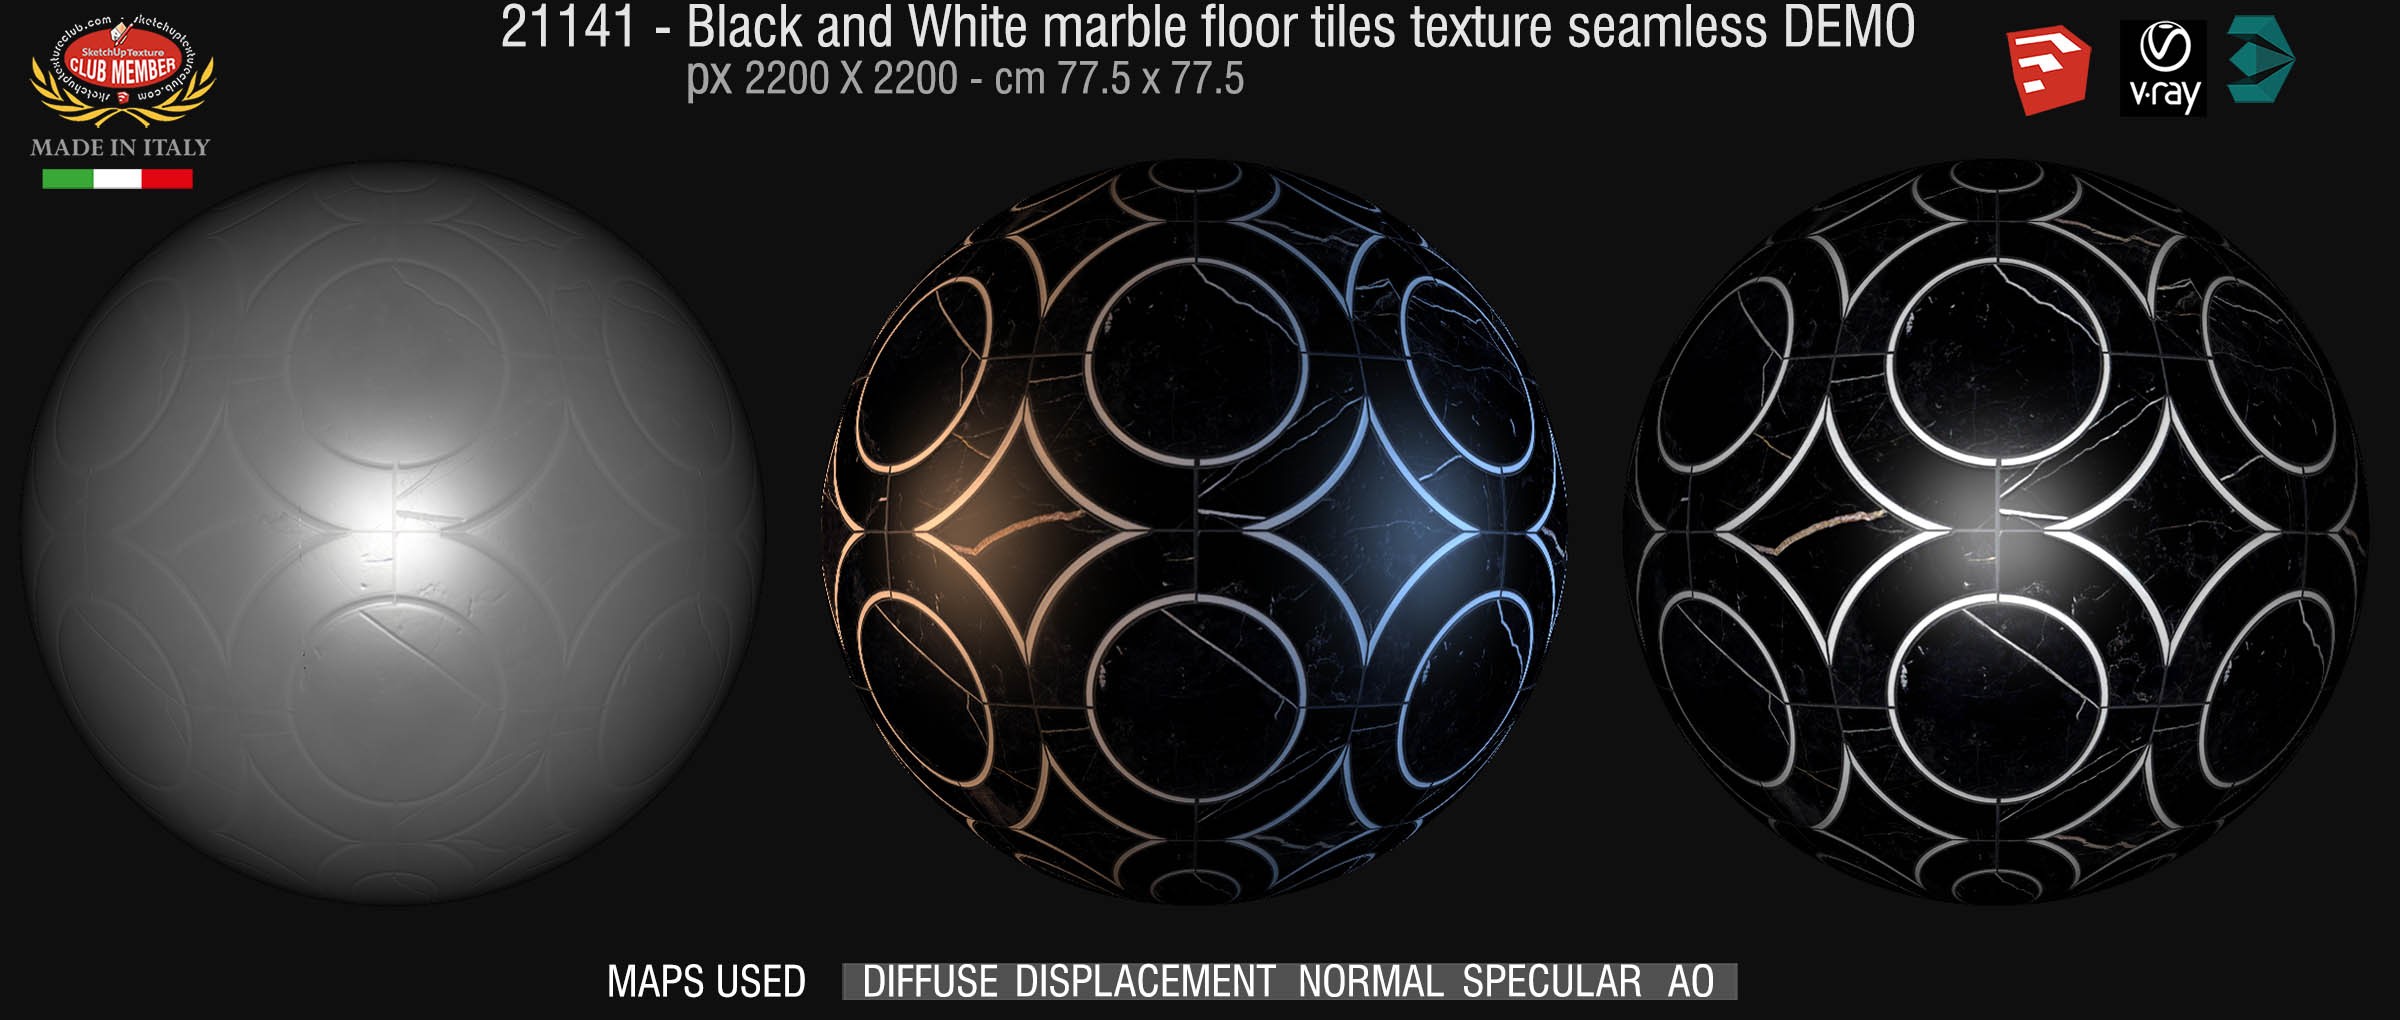 21141 Black and white marble tile texture seamless + maps DEMO